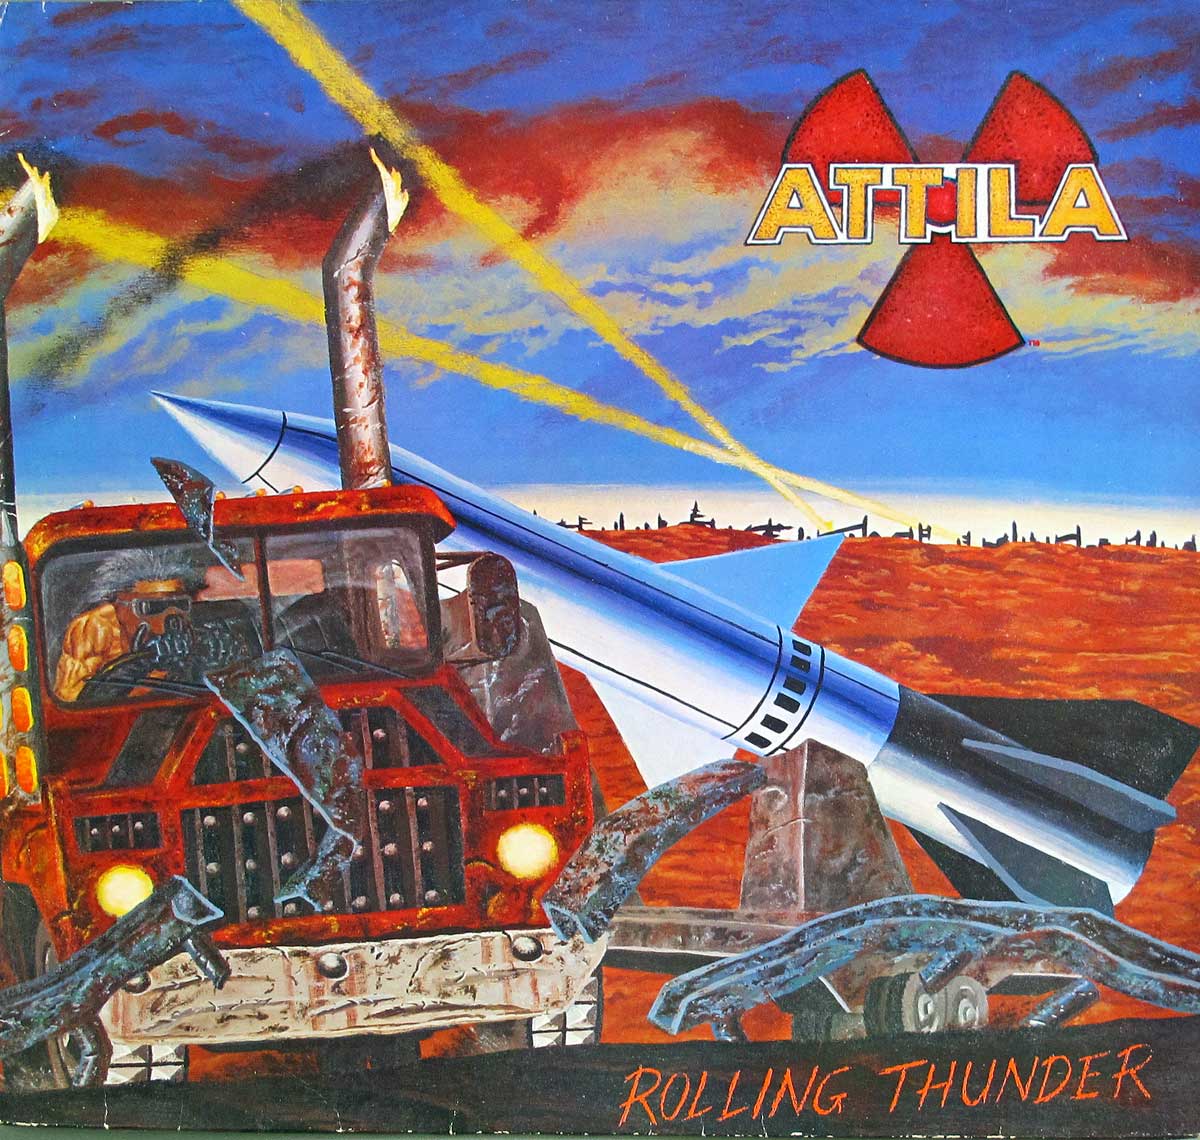 large album front cover photo of: ATTILA ROLLING THUNDER 